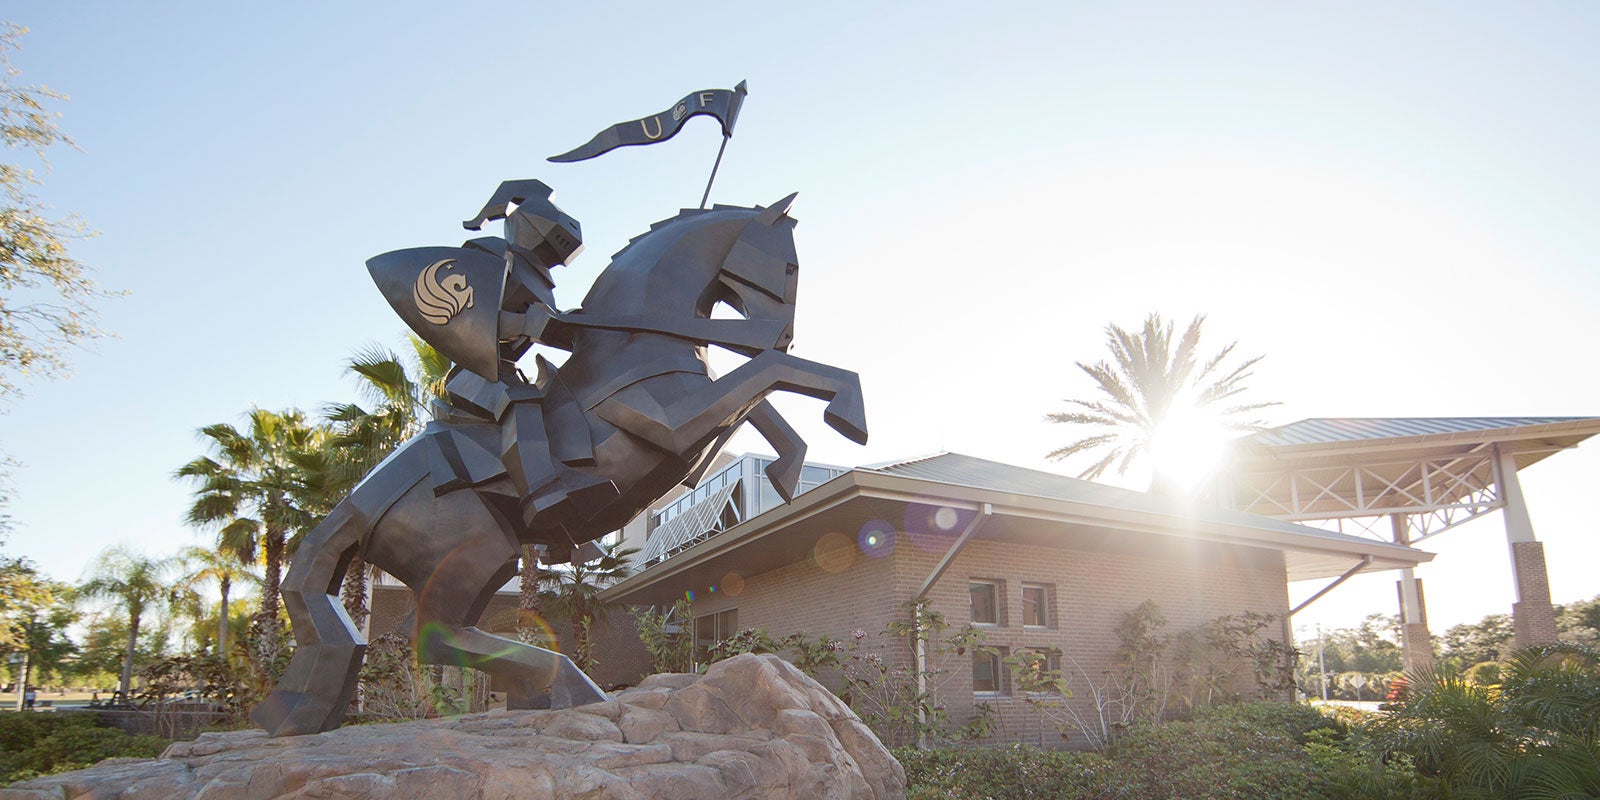 Background Image of UCF Knight on horseback leading the charge to the future of higher education